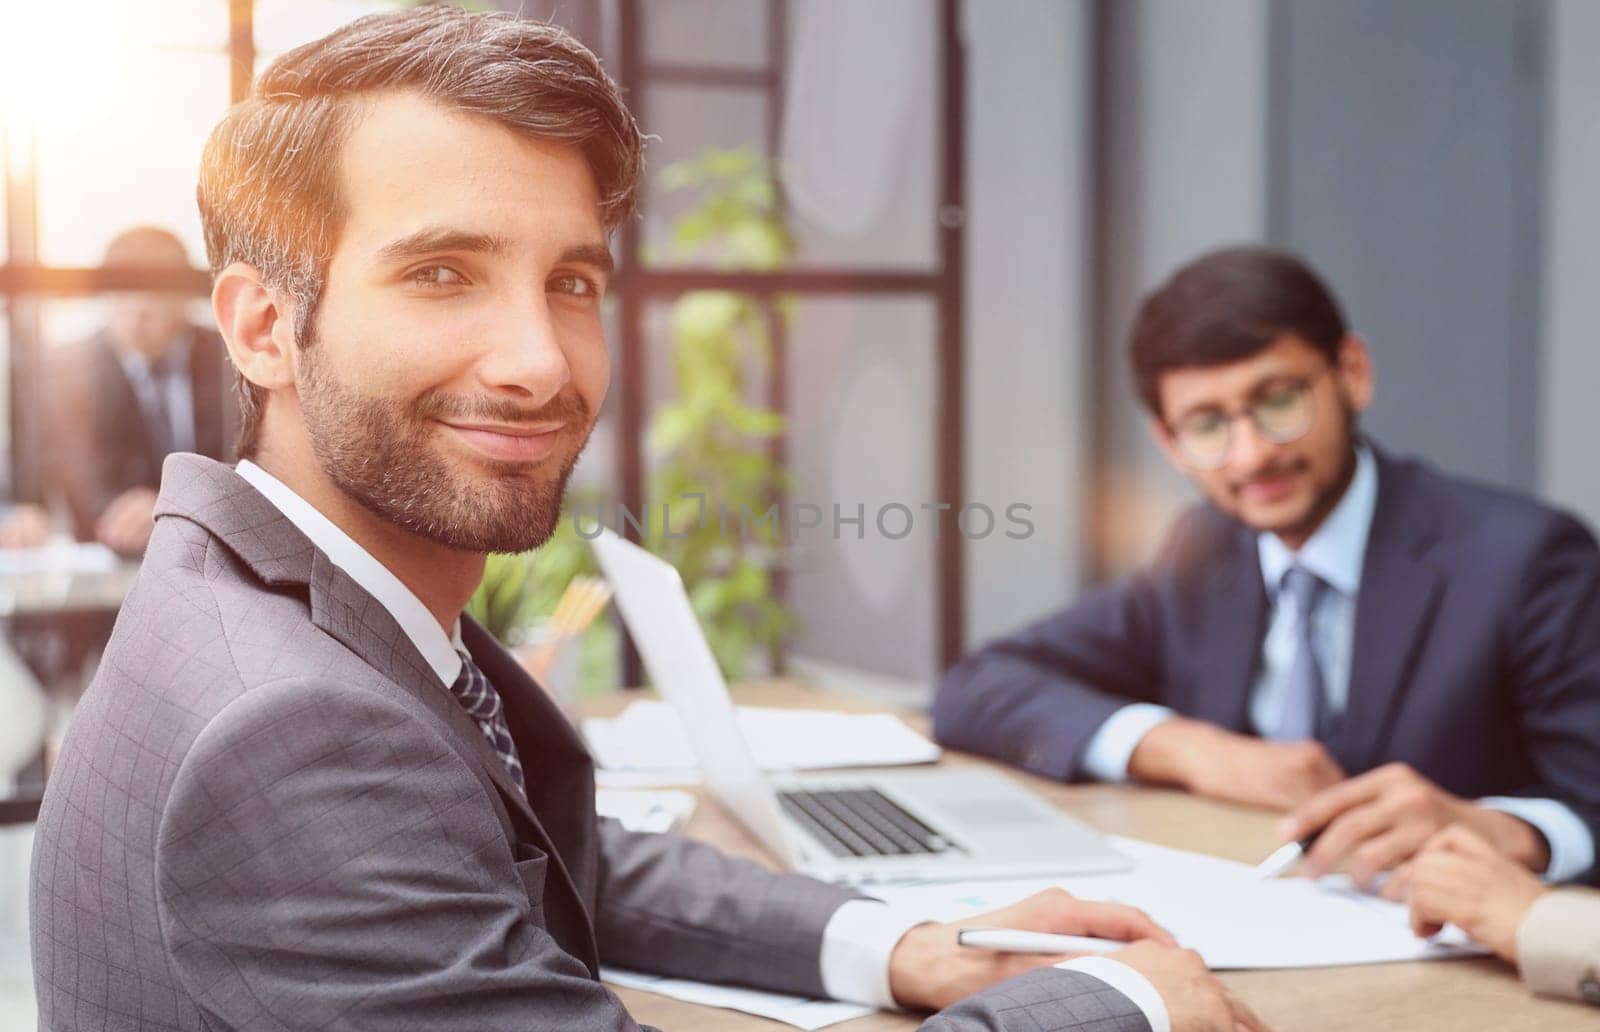 male boss against the background of her colleagues looks at the camera in a modern office by Prosto